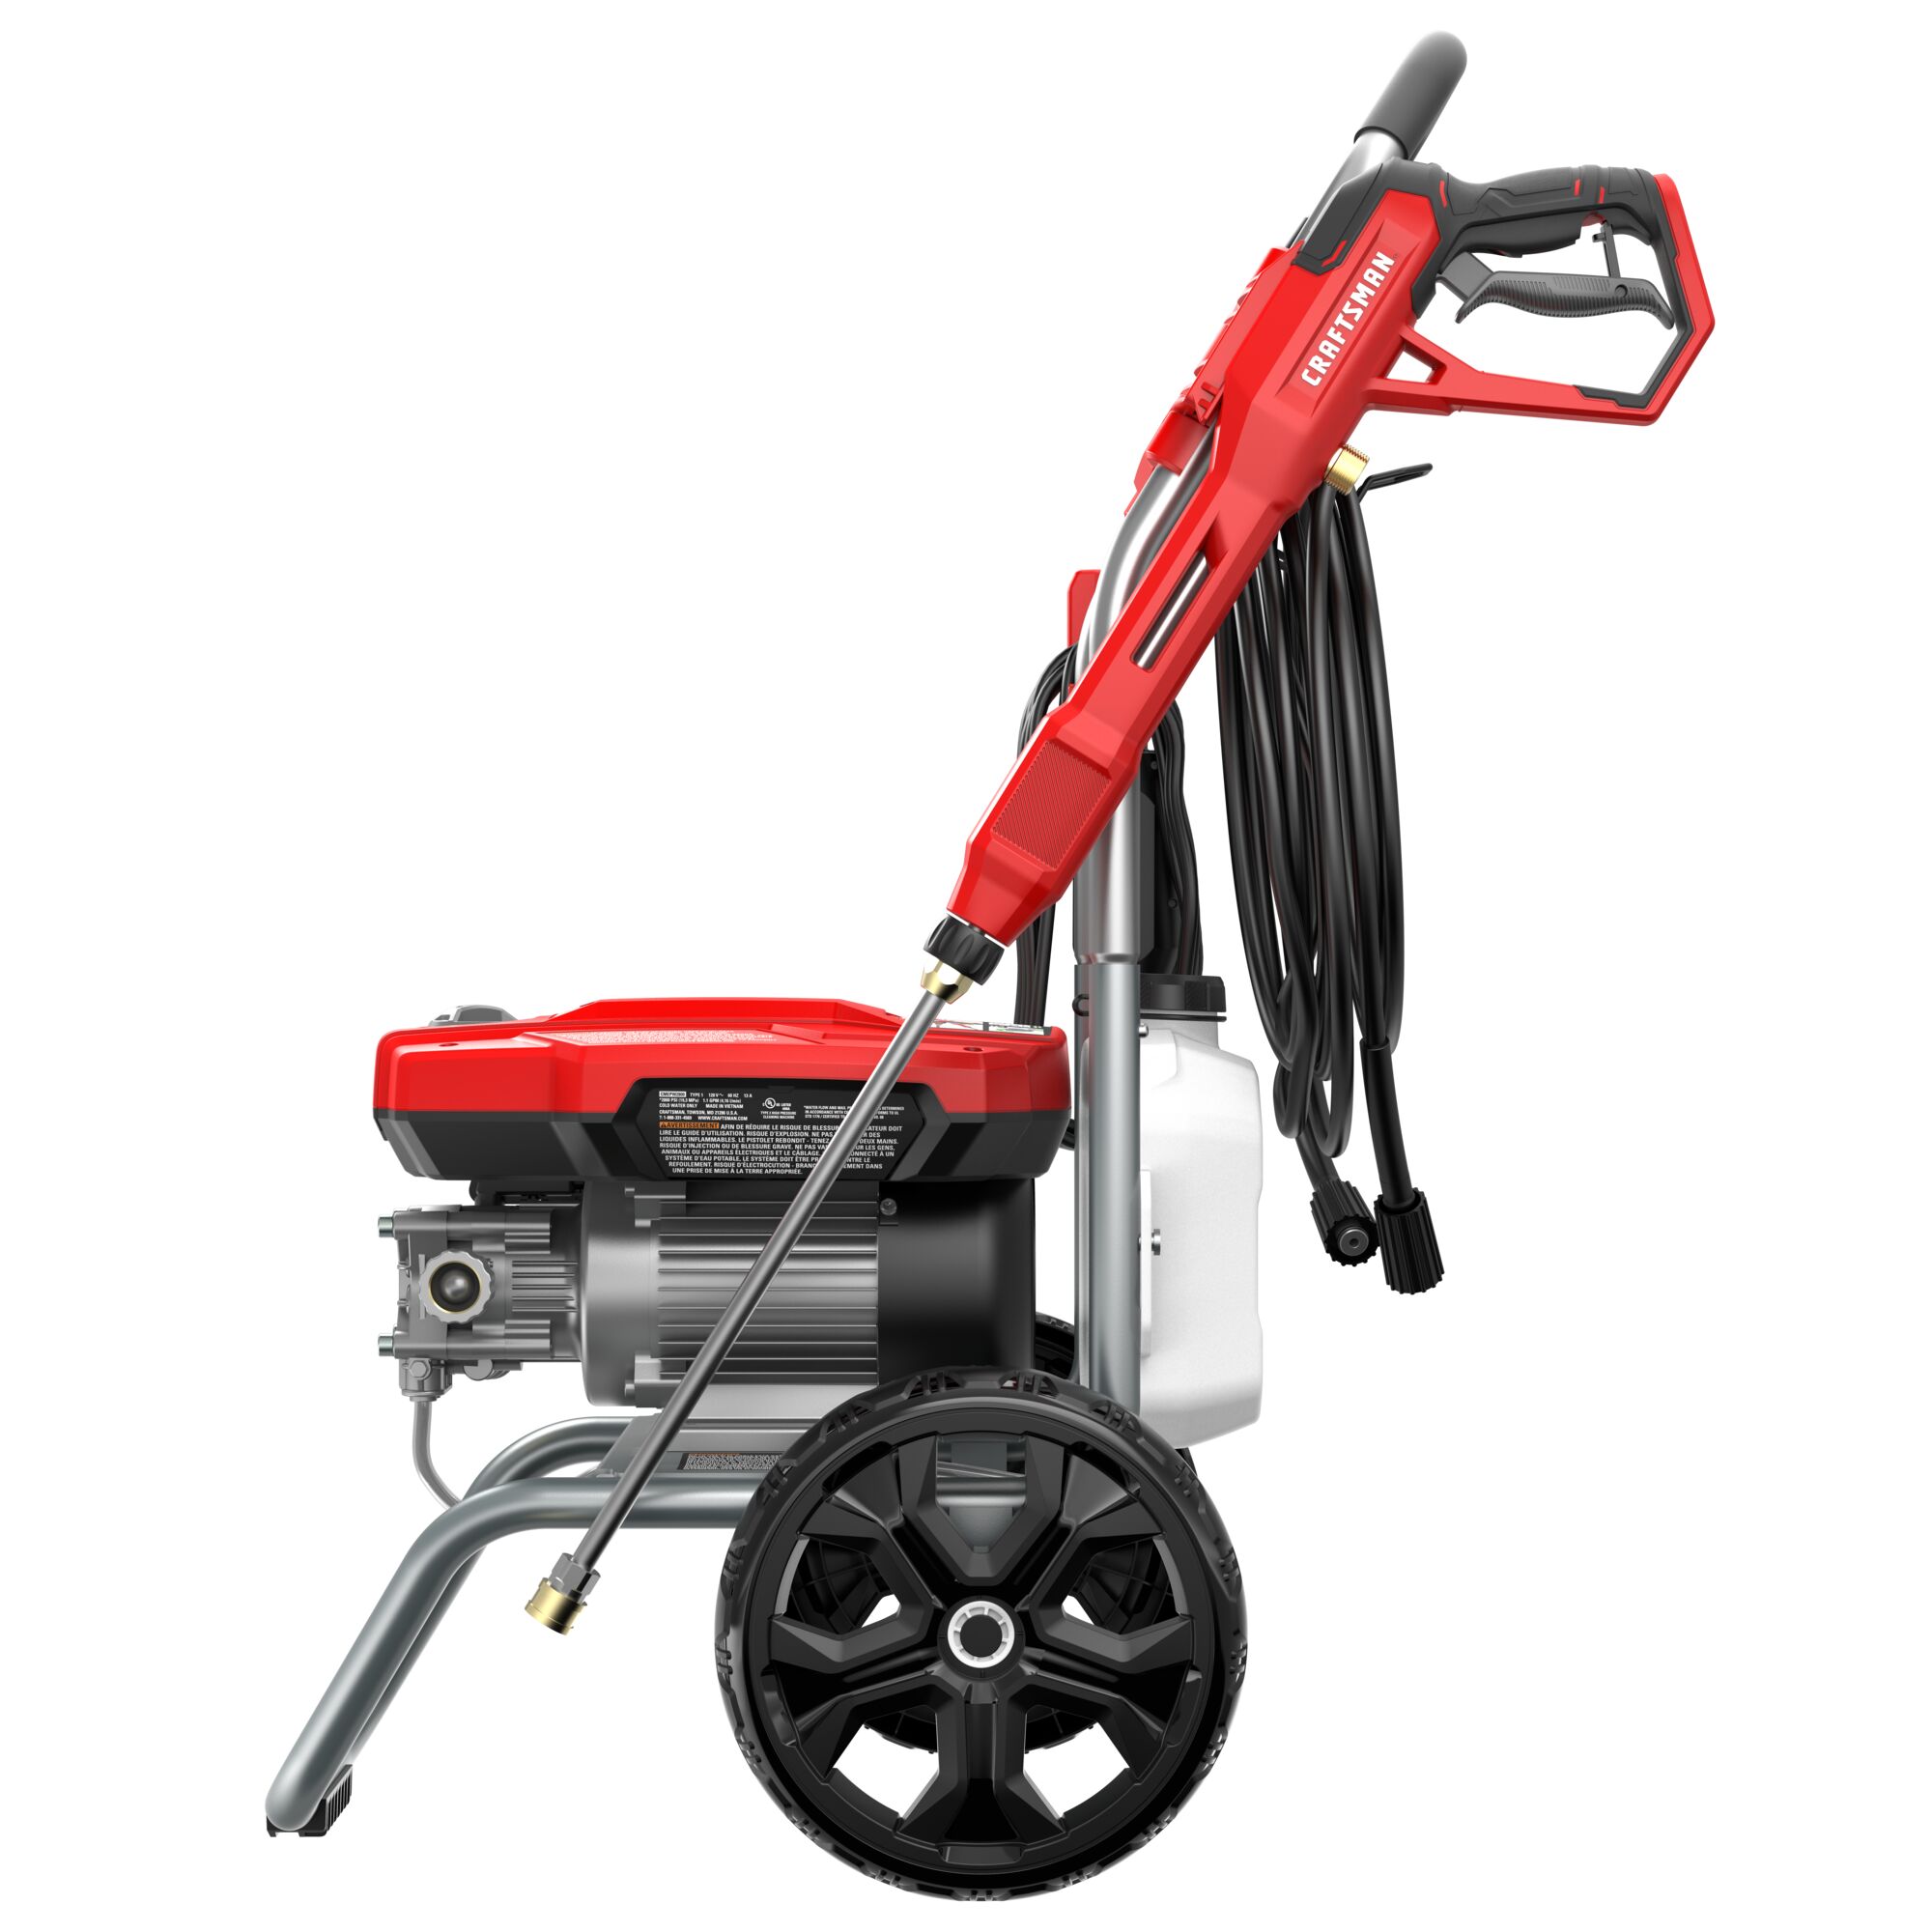 CRAFTSMAN 2800 PSI Cold Water Pressure Washer on white background